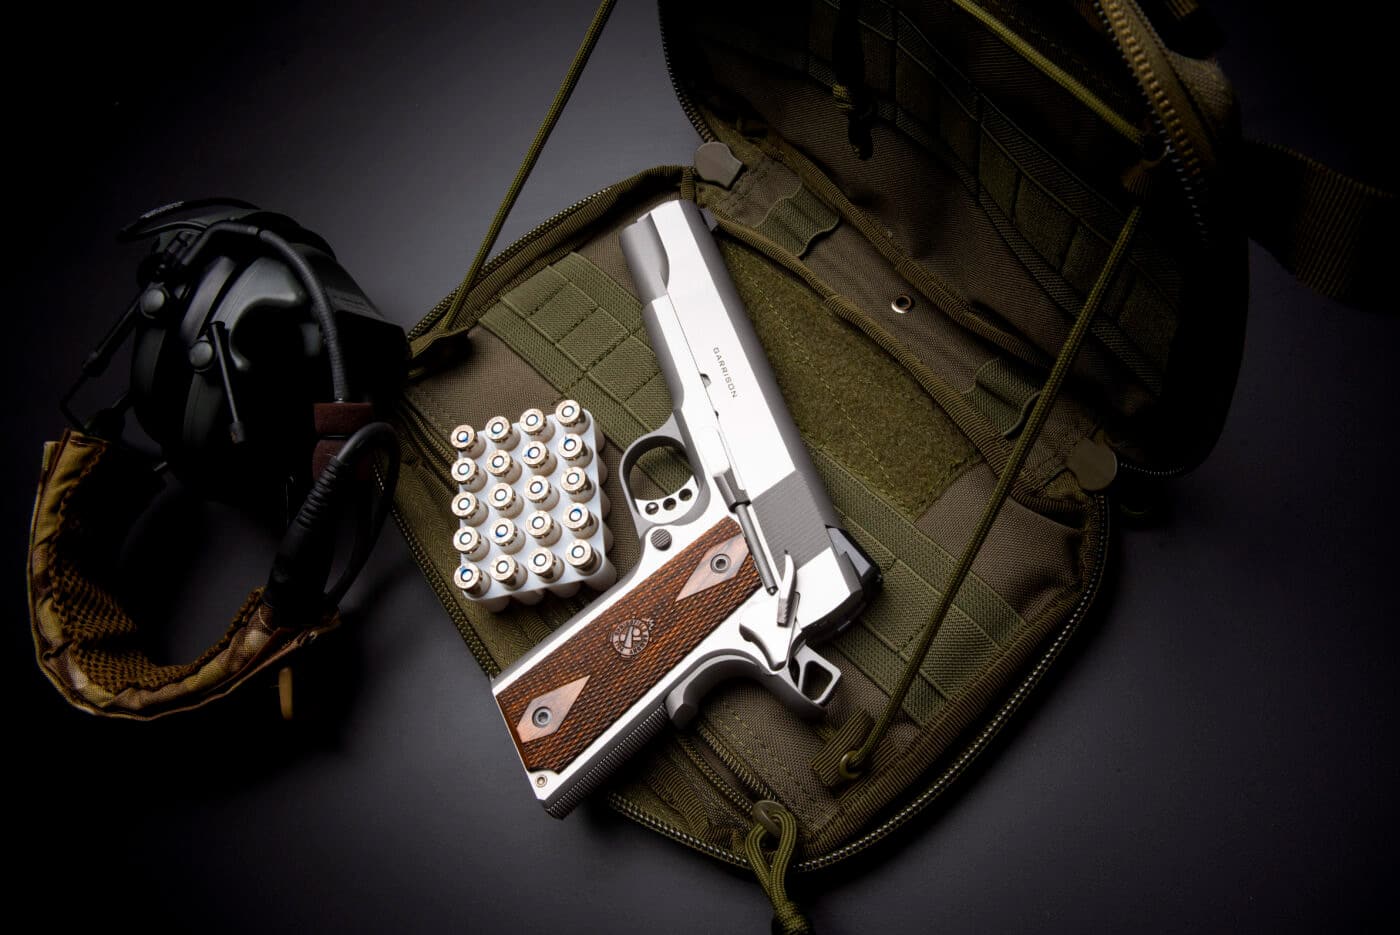 Springfield Armory 9mm Garrison 1911 in stainless steel next to ammo and range gear